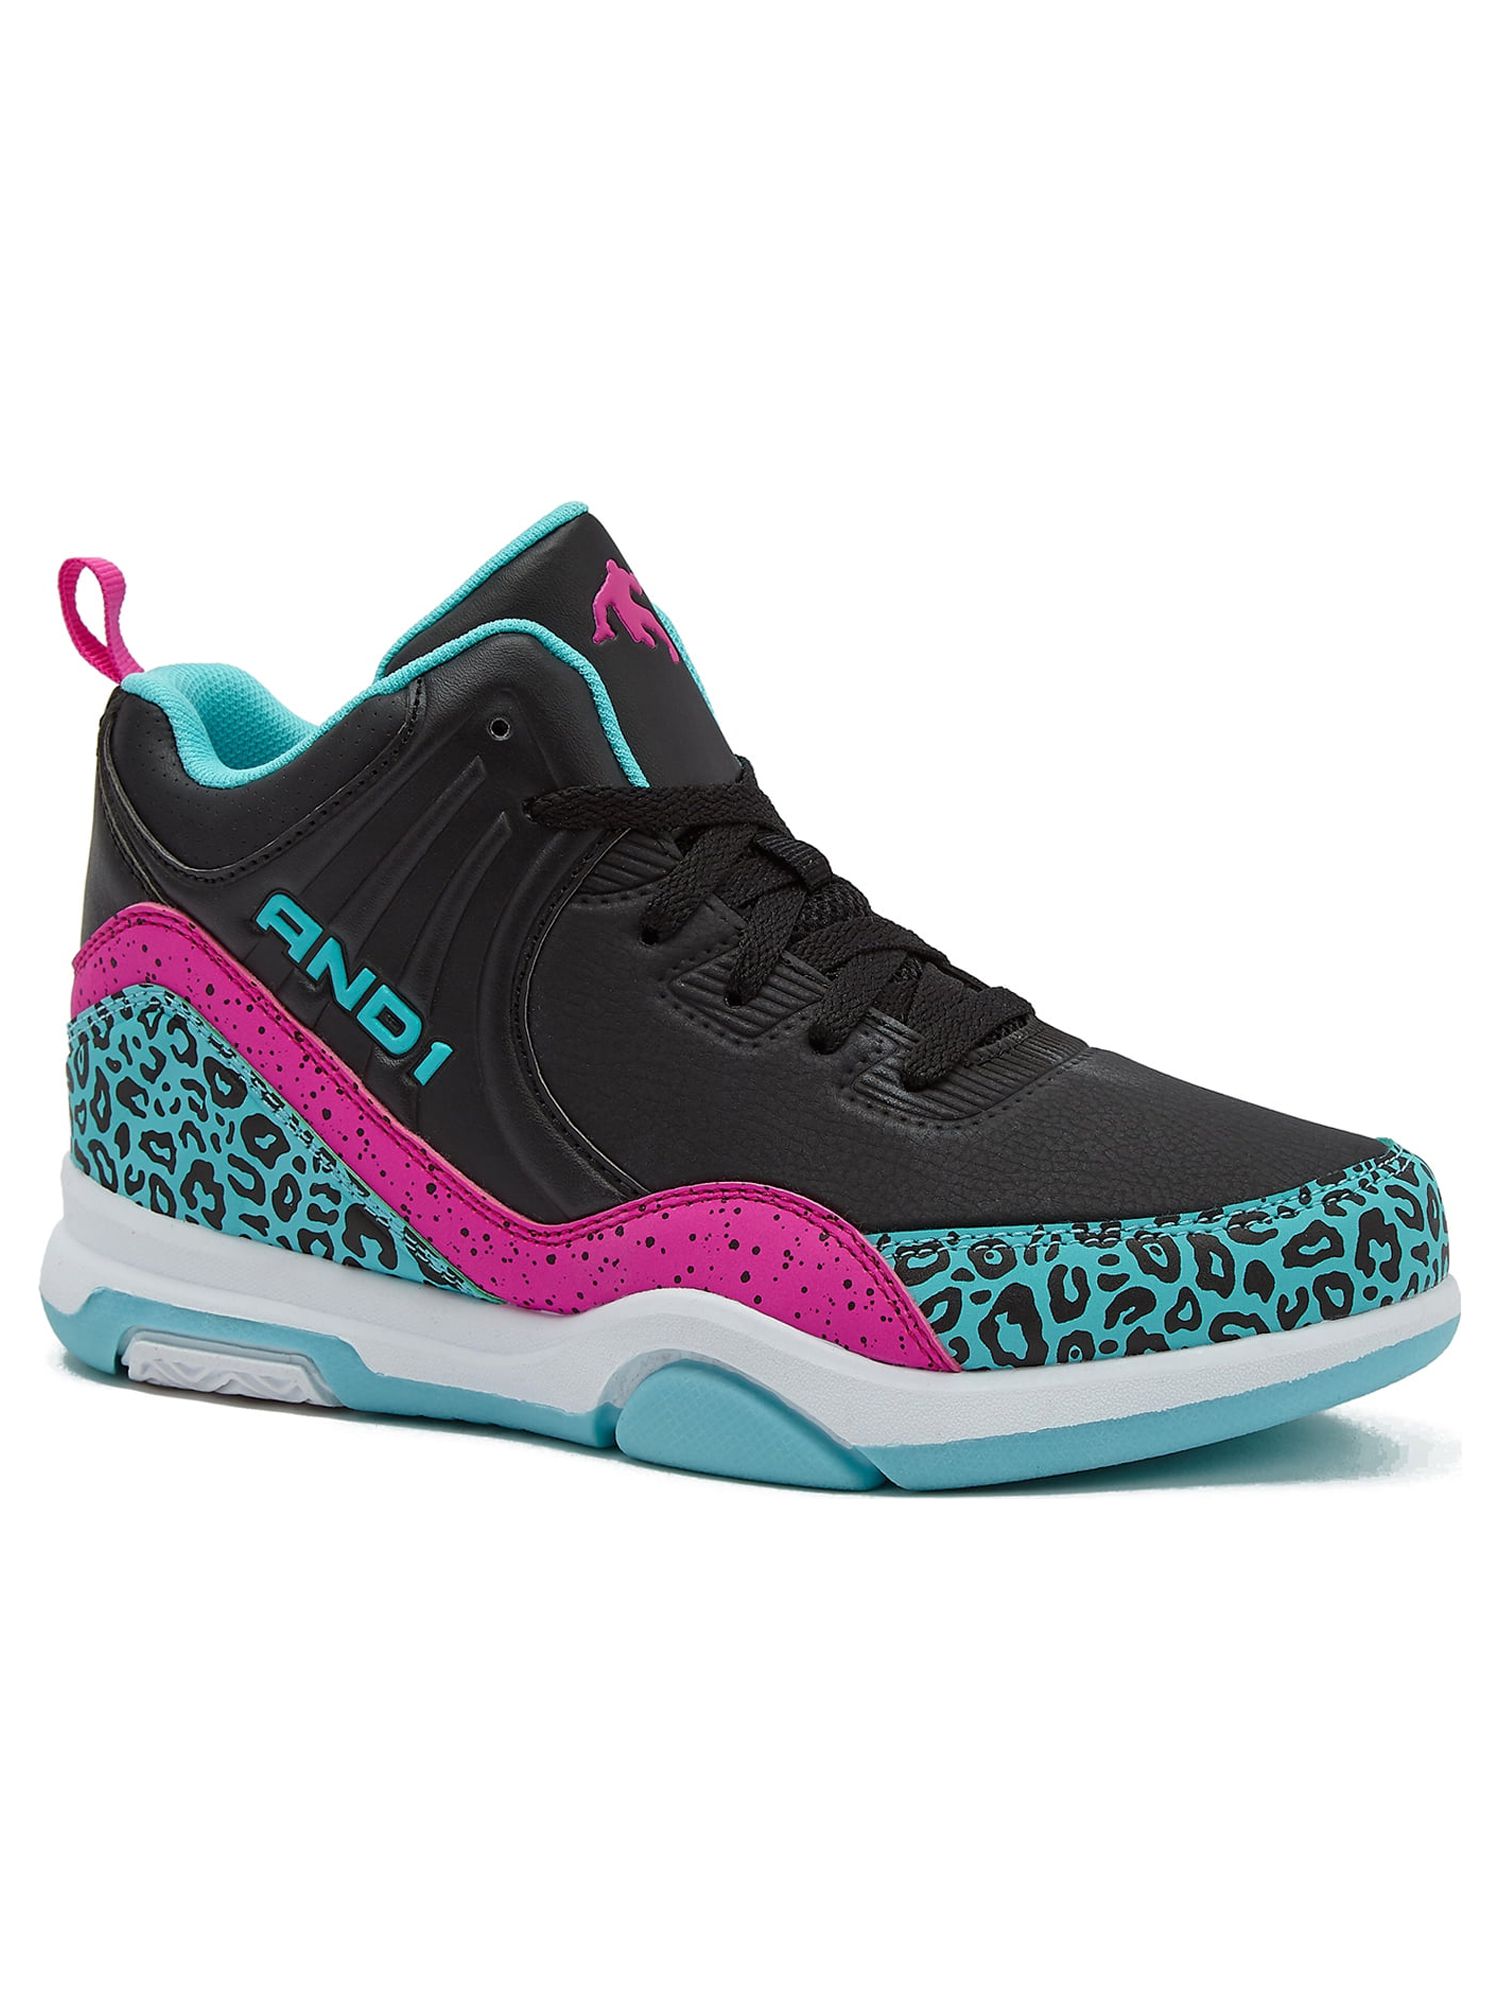 AND1 Little & Big Girl Athletic Fierce Basketball Sneaker, Sizes 13-6 - image 1 of 5